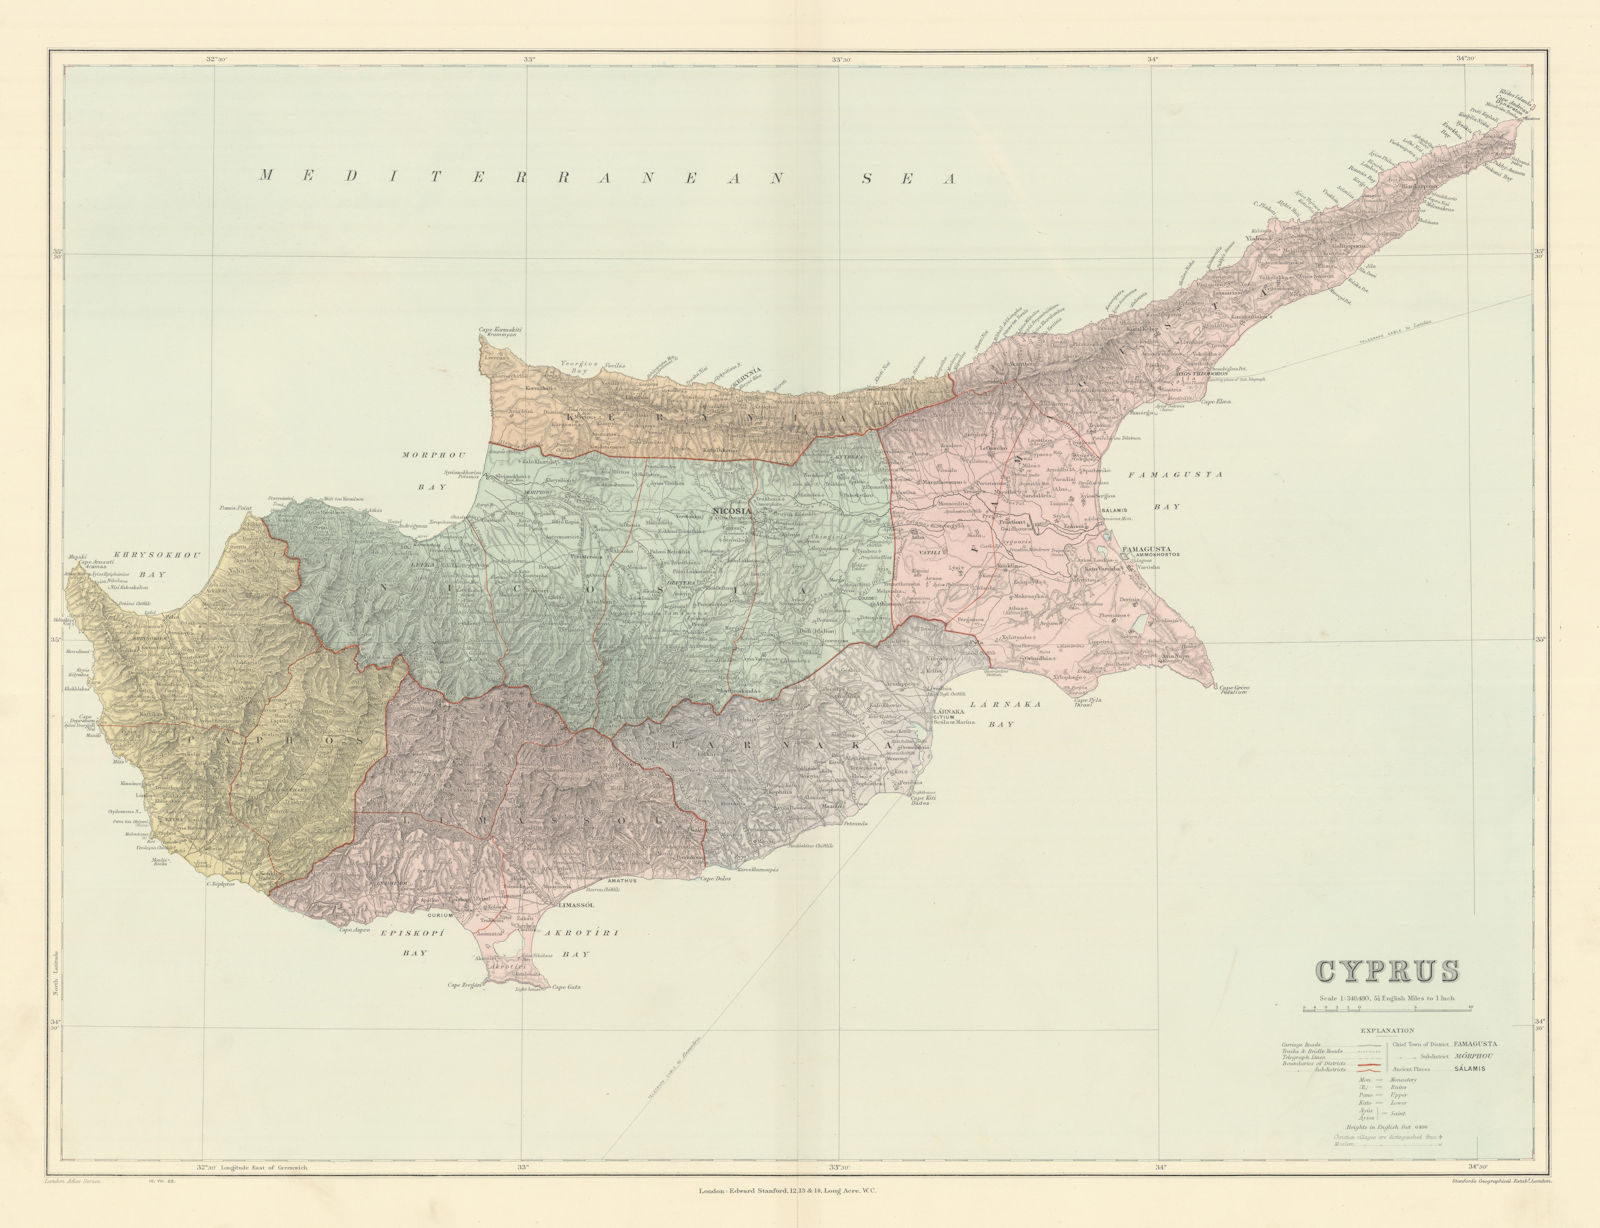 Associate Product Cyprus. Districts. Ancient sites. Large 51x66cm. STANFORD 1904 old antique map